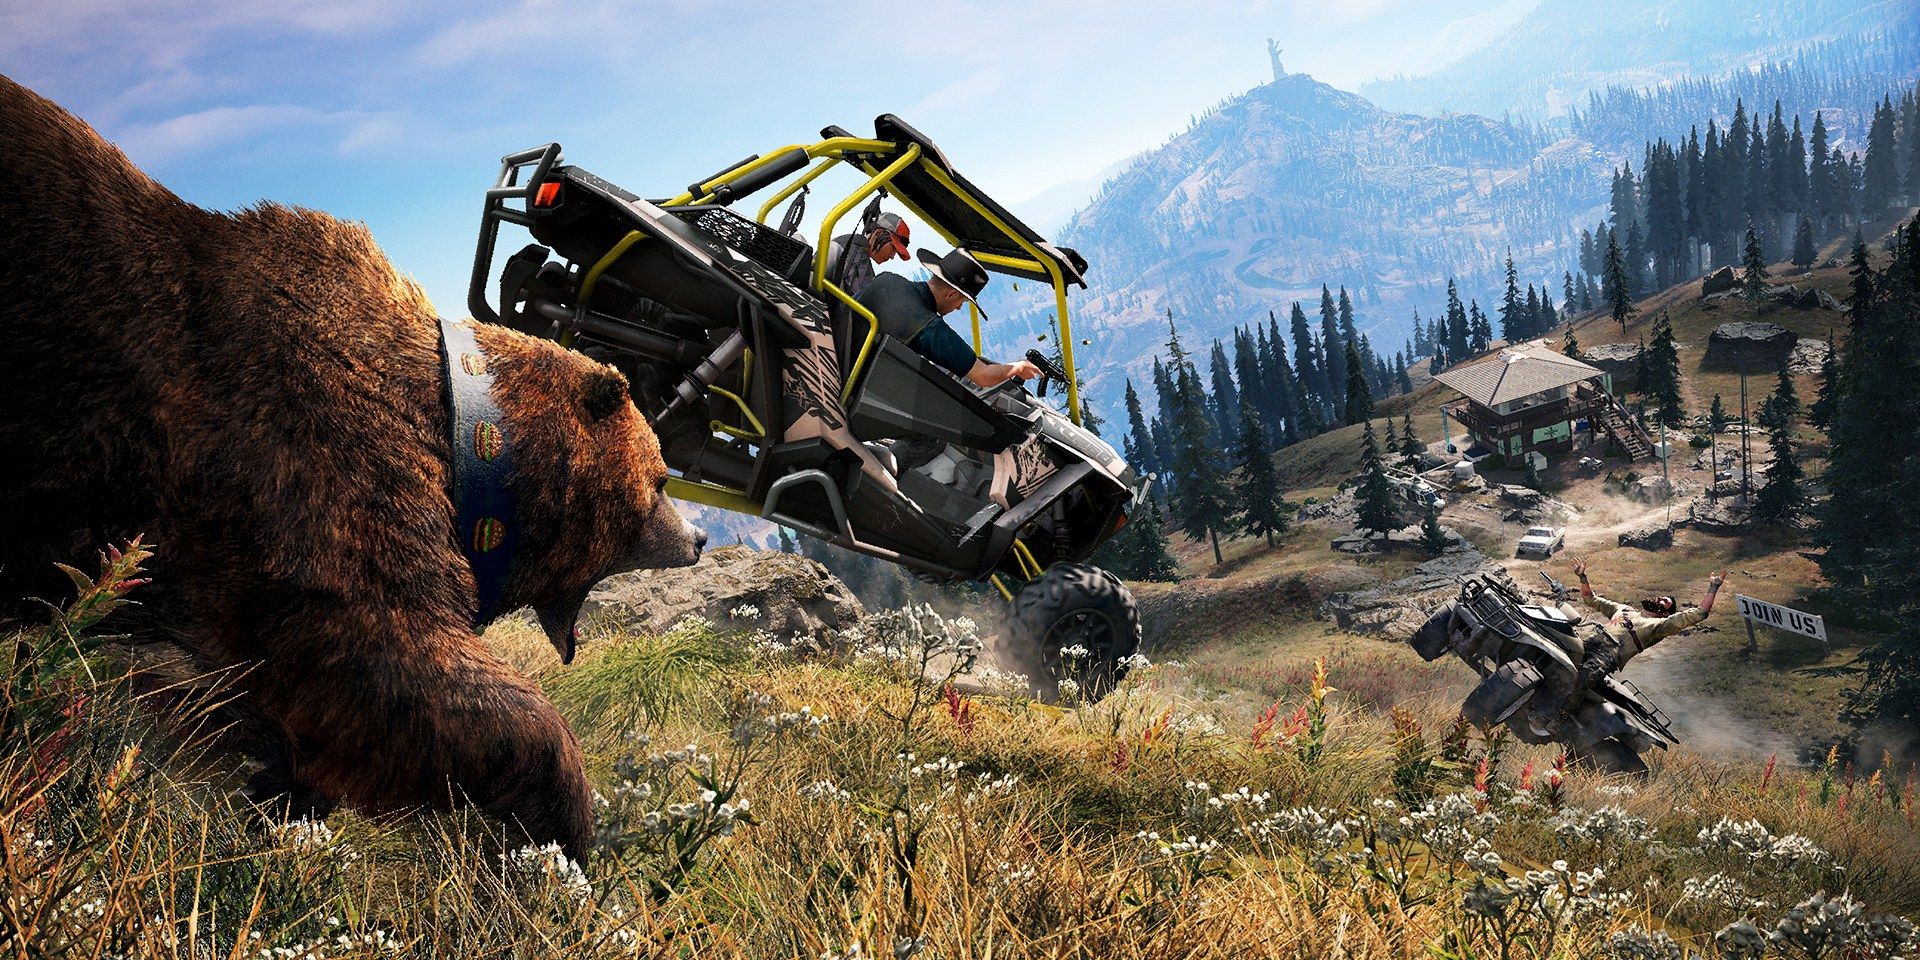 far cry 5 cheats for pc